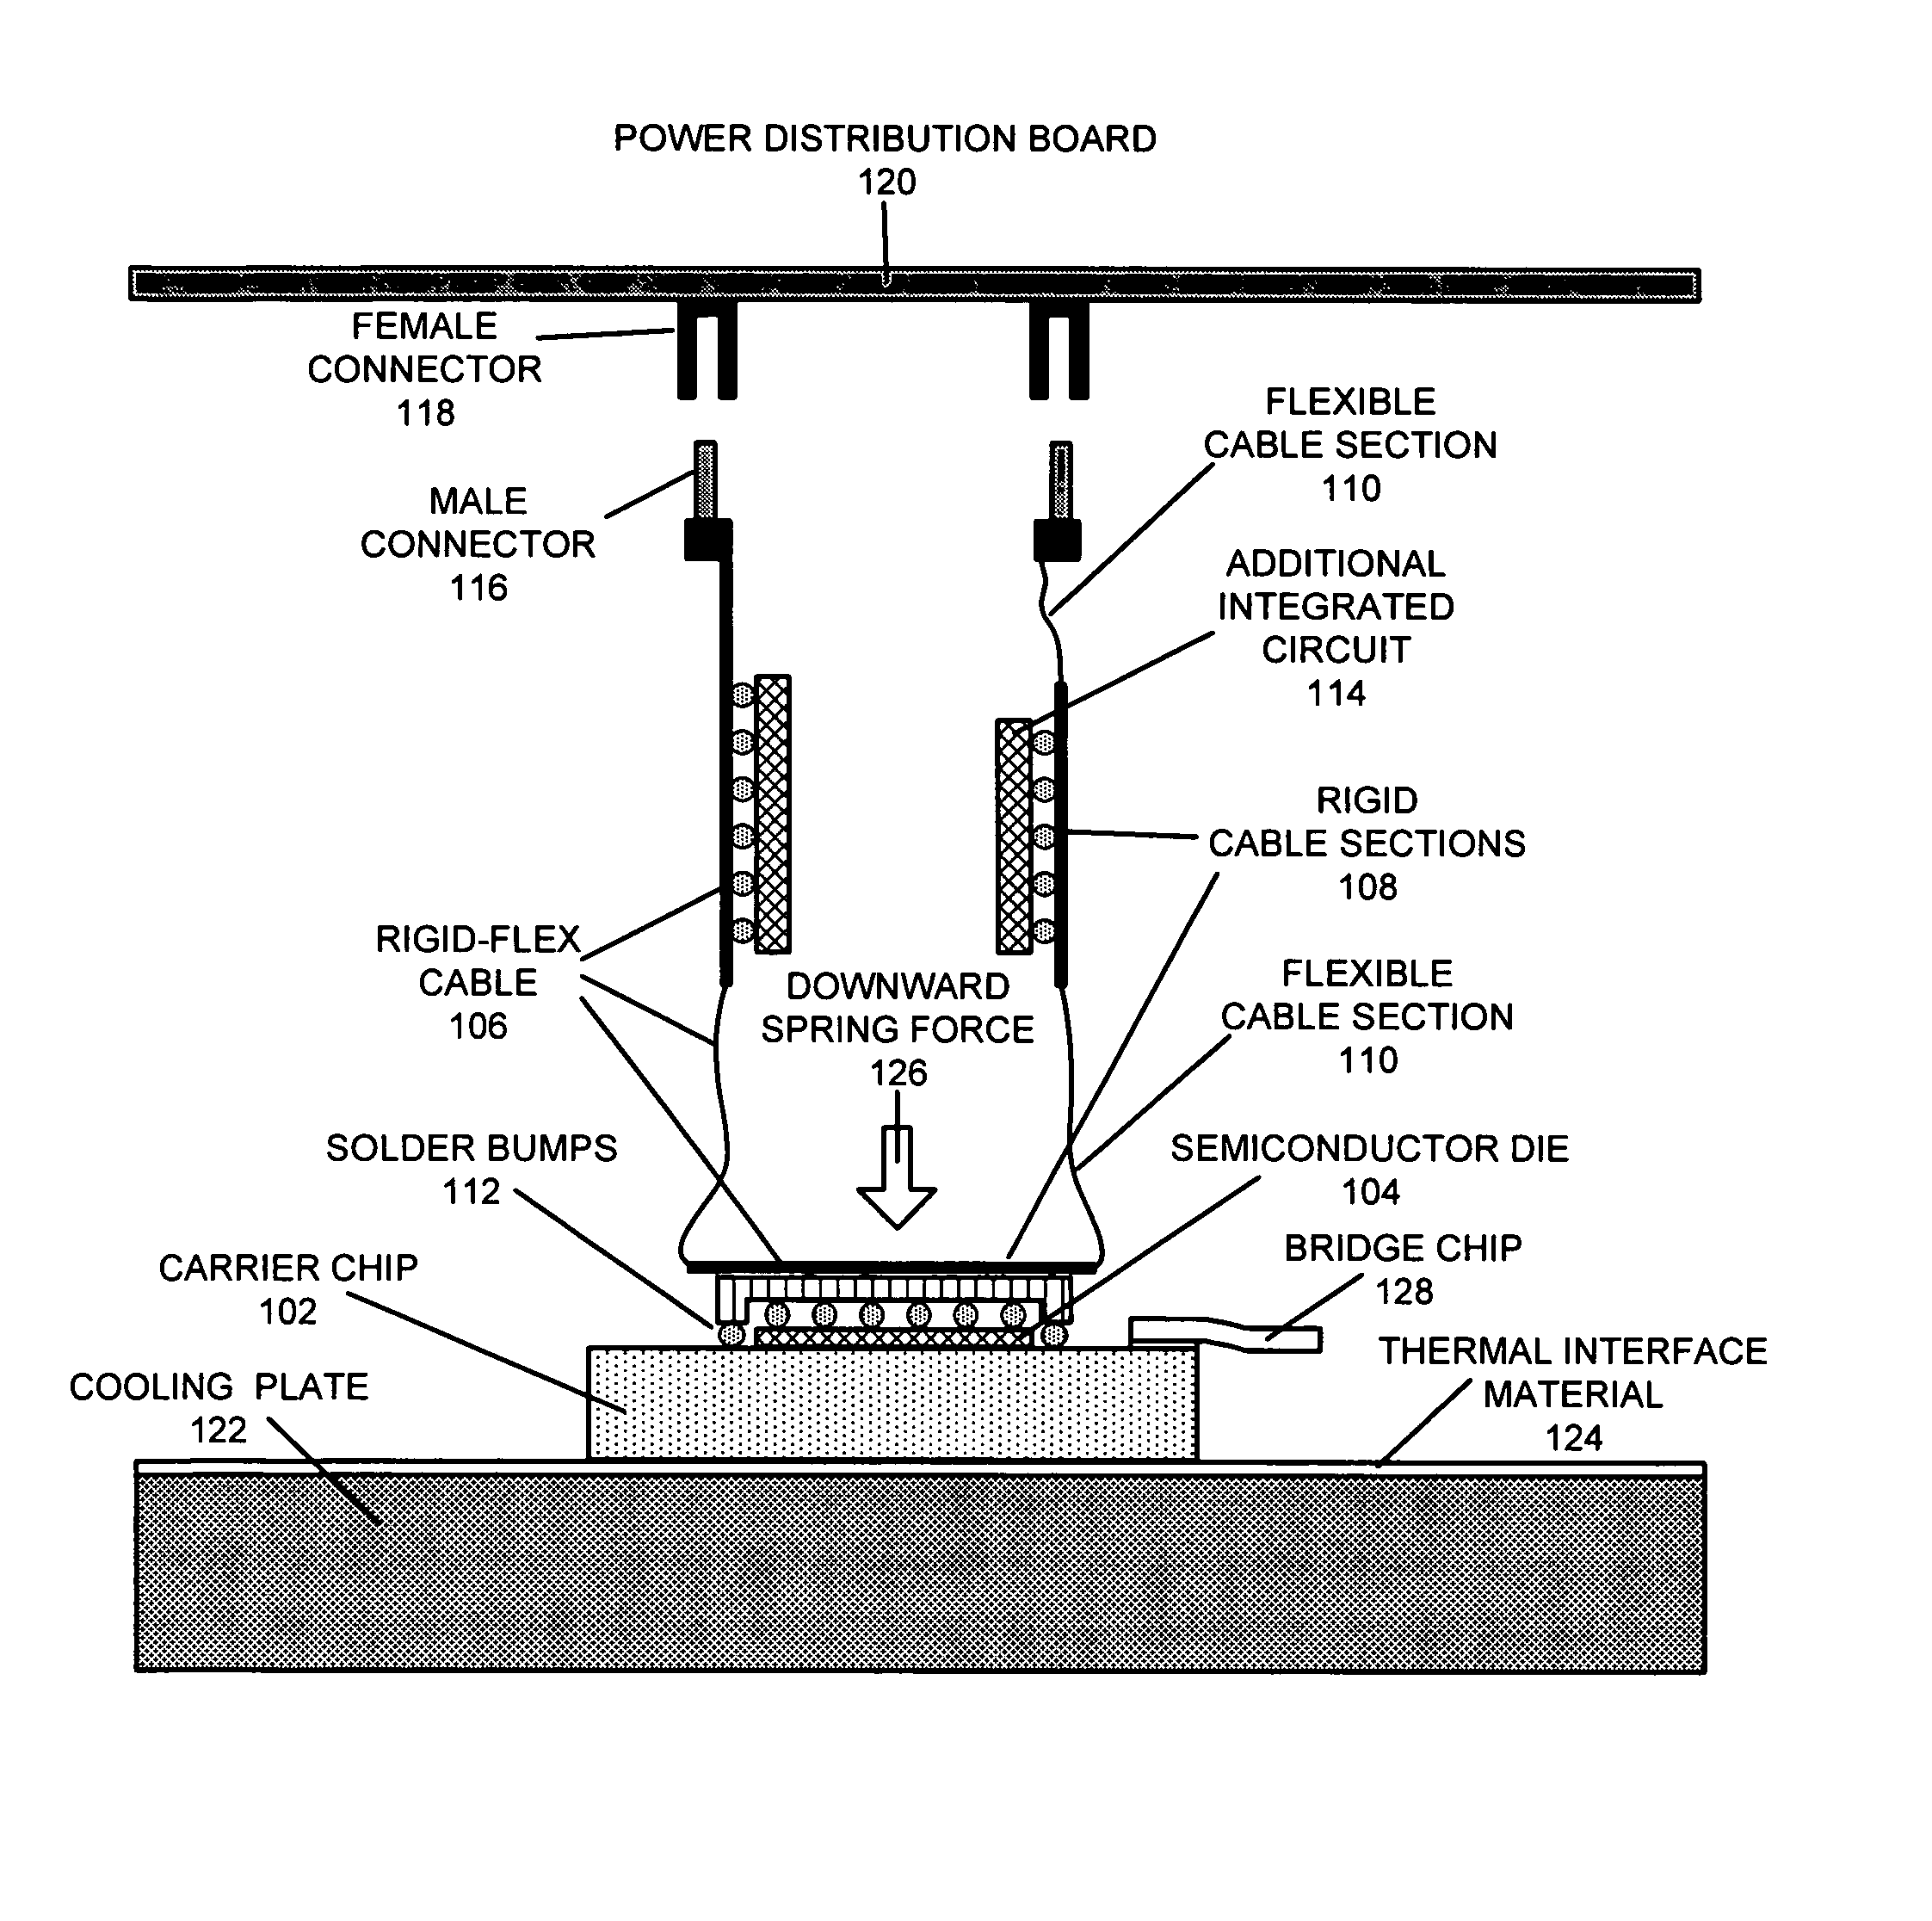 Multi-chip module structure with power delivery using flexible cables